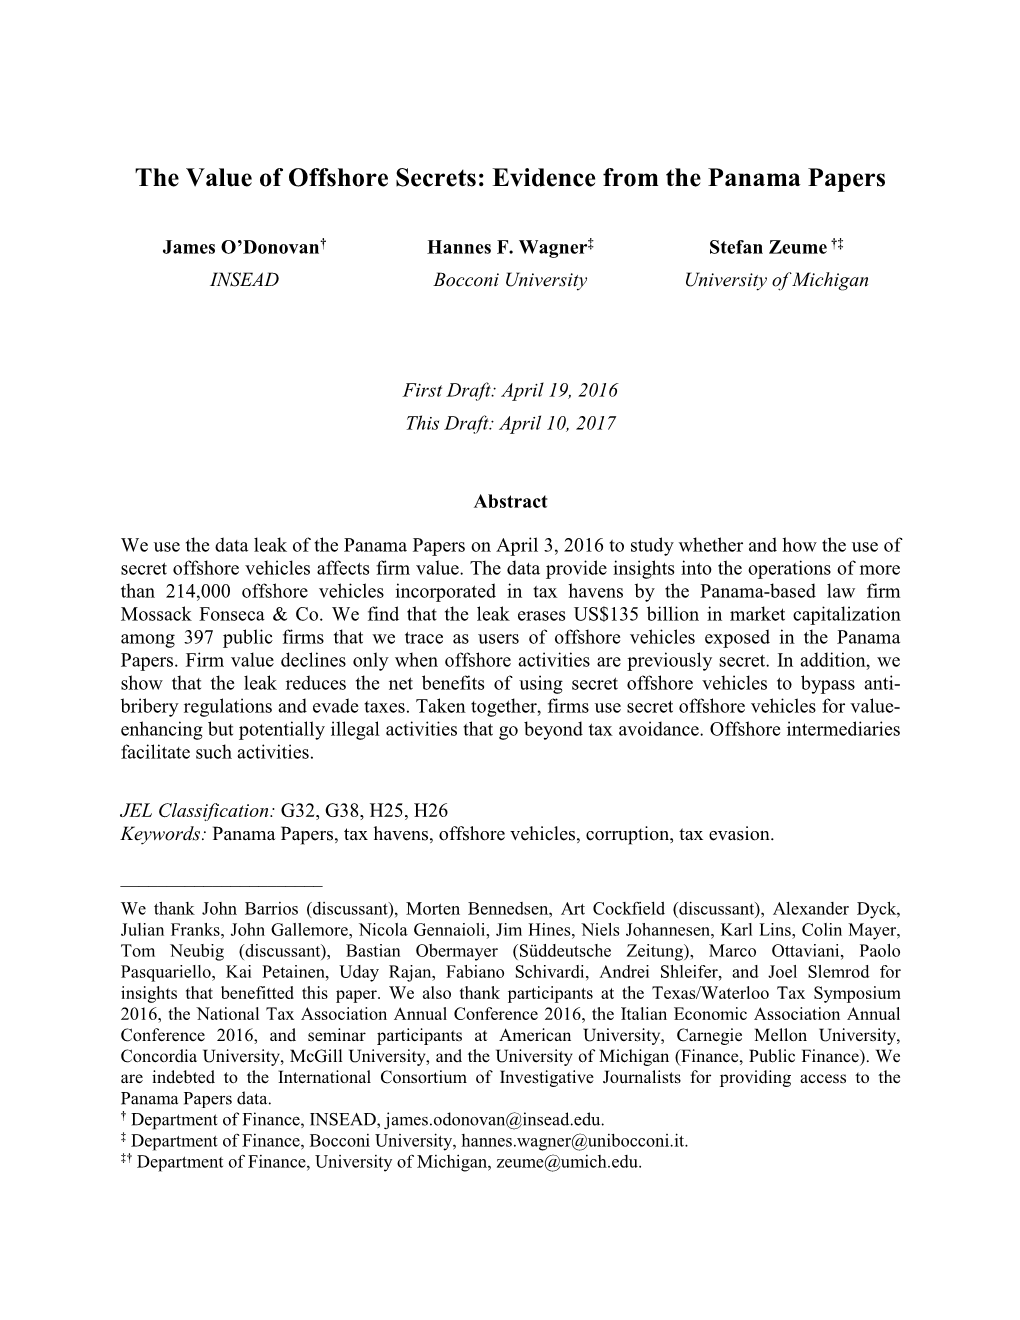 The Value of Offshore Secrets: Evidence from the Panama Papers